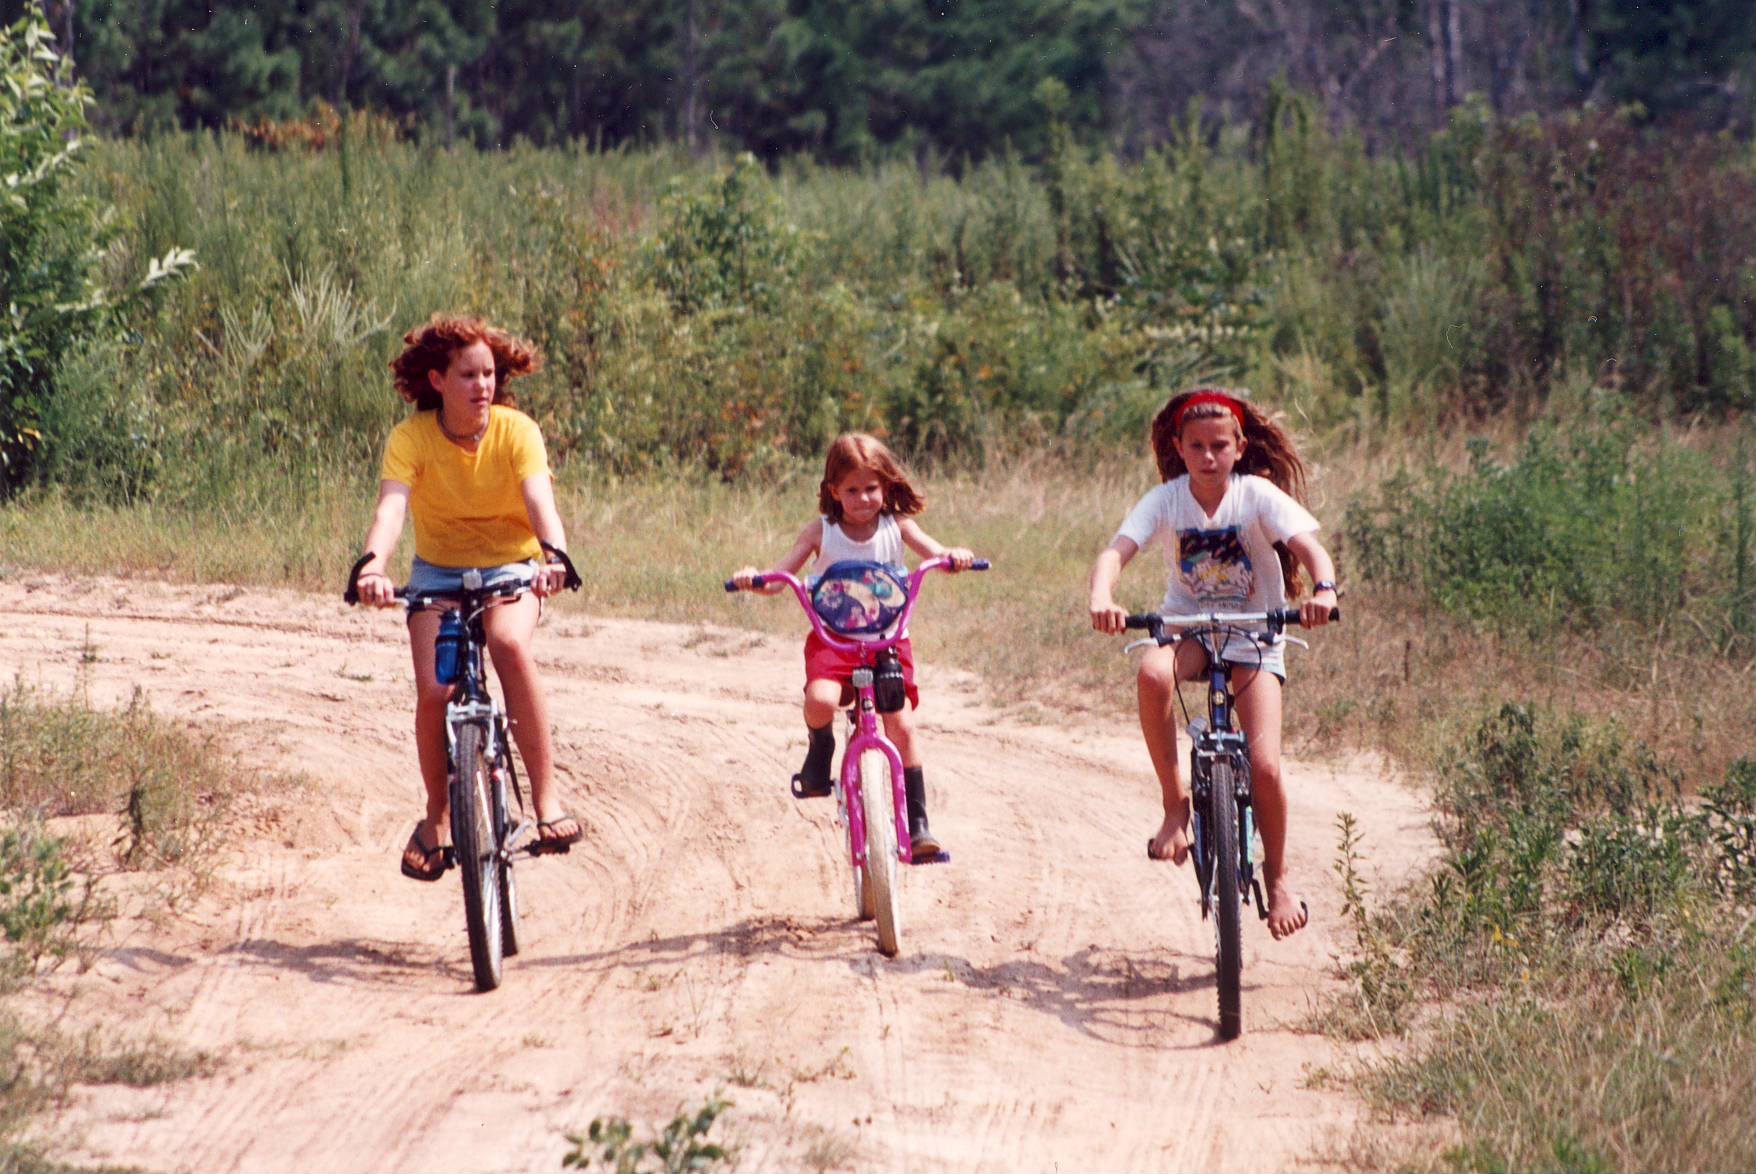 Margaret, Helen, and Mary Clay, Summer 2001